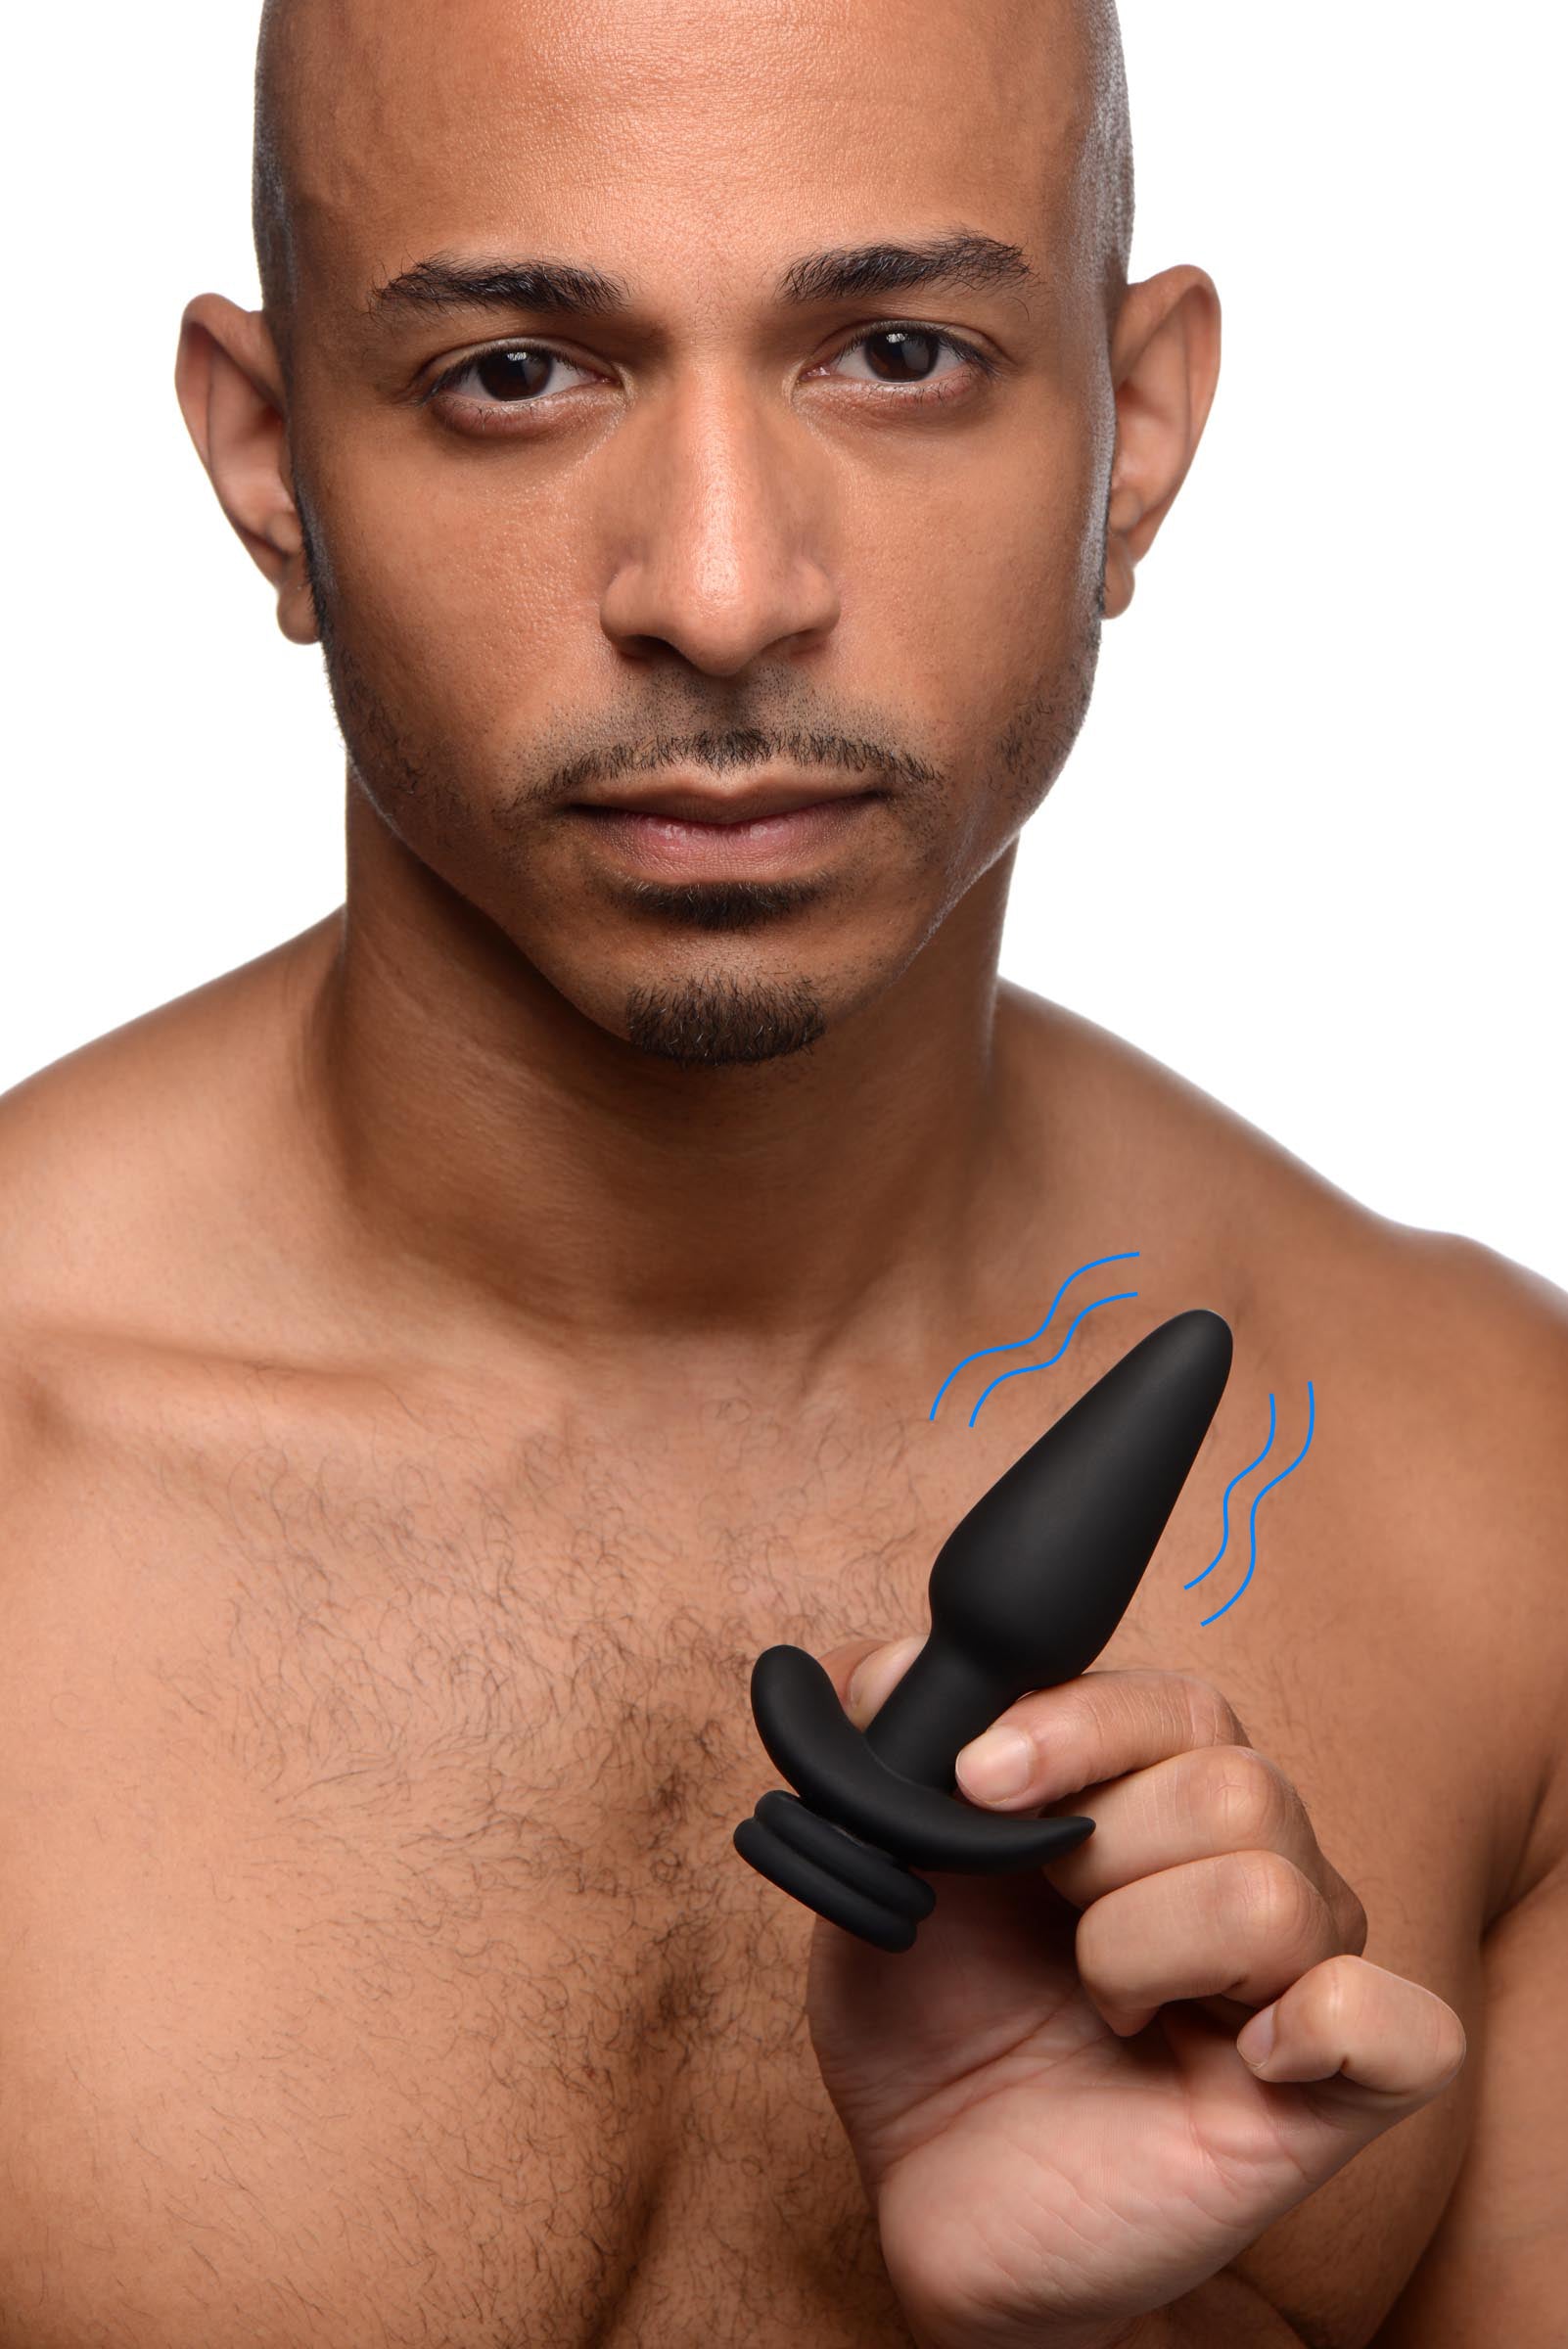 Interchangeable 10X Vibrating Silicone Anal Plug with Remote